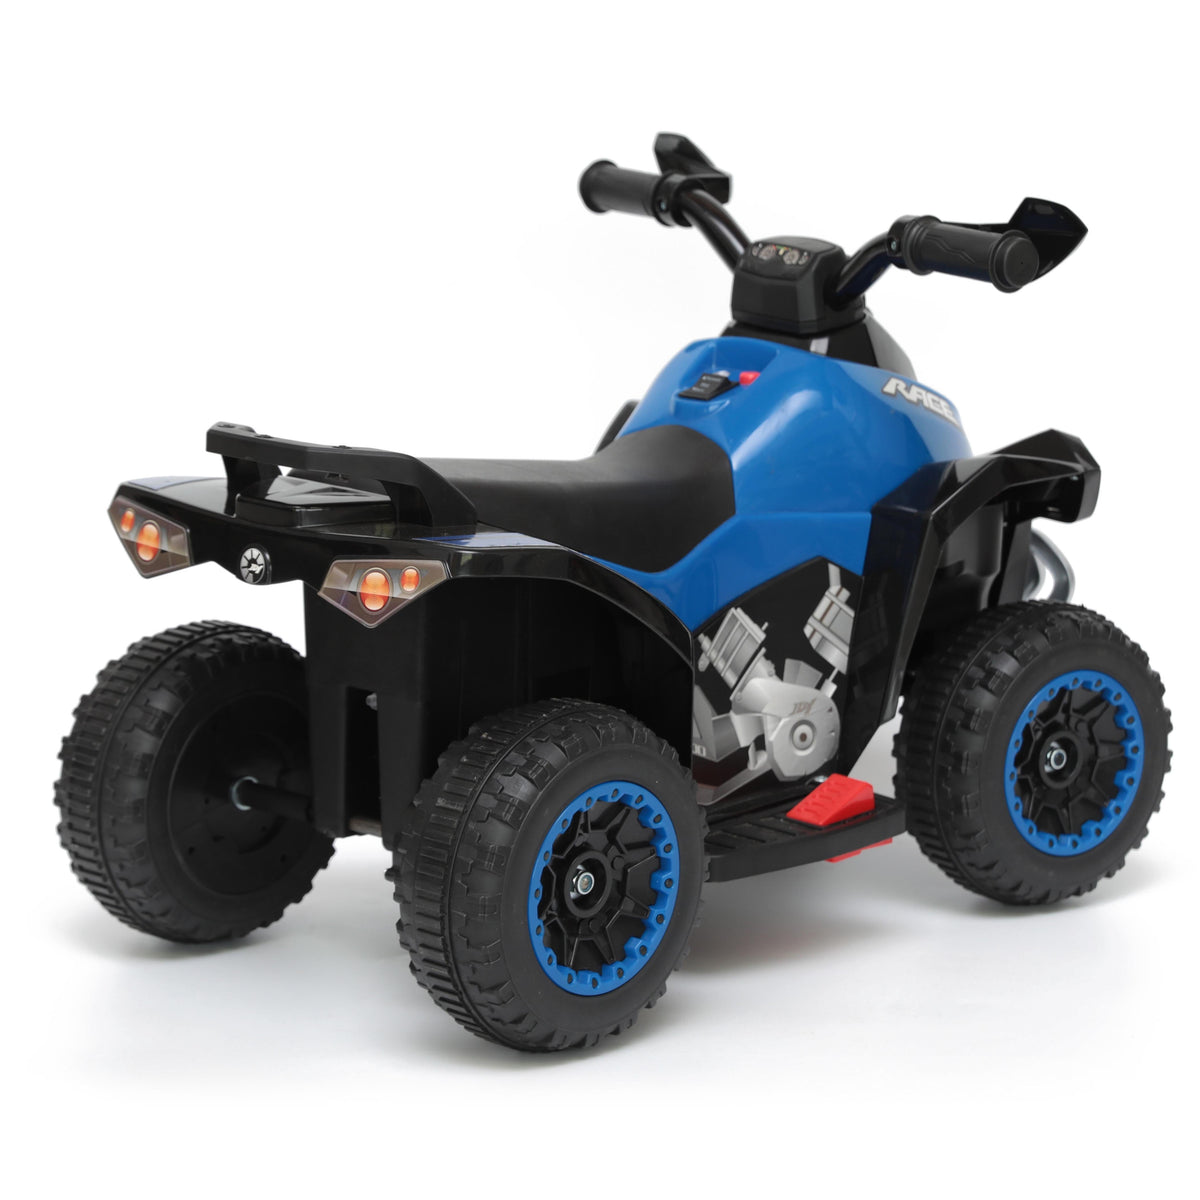 Quad Ride-on Electronic 4 Wheel ATV (Red) for Children - Up To 3km/h